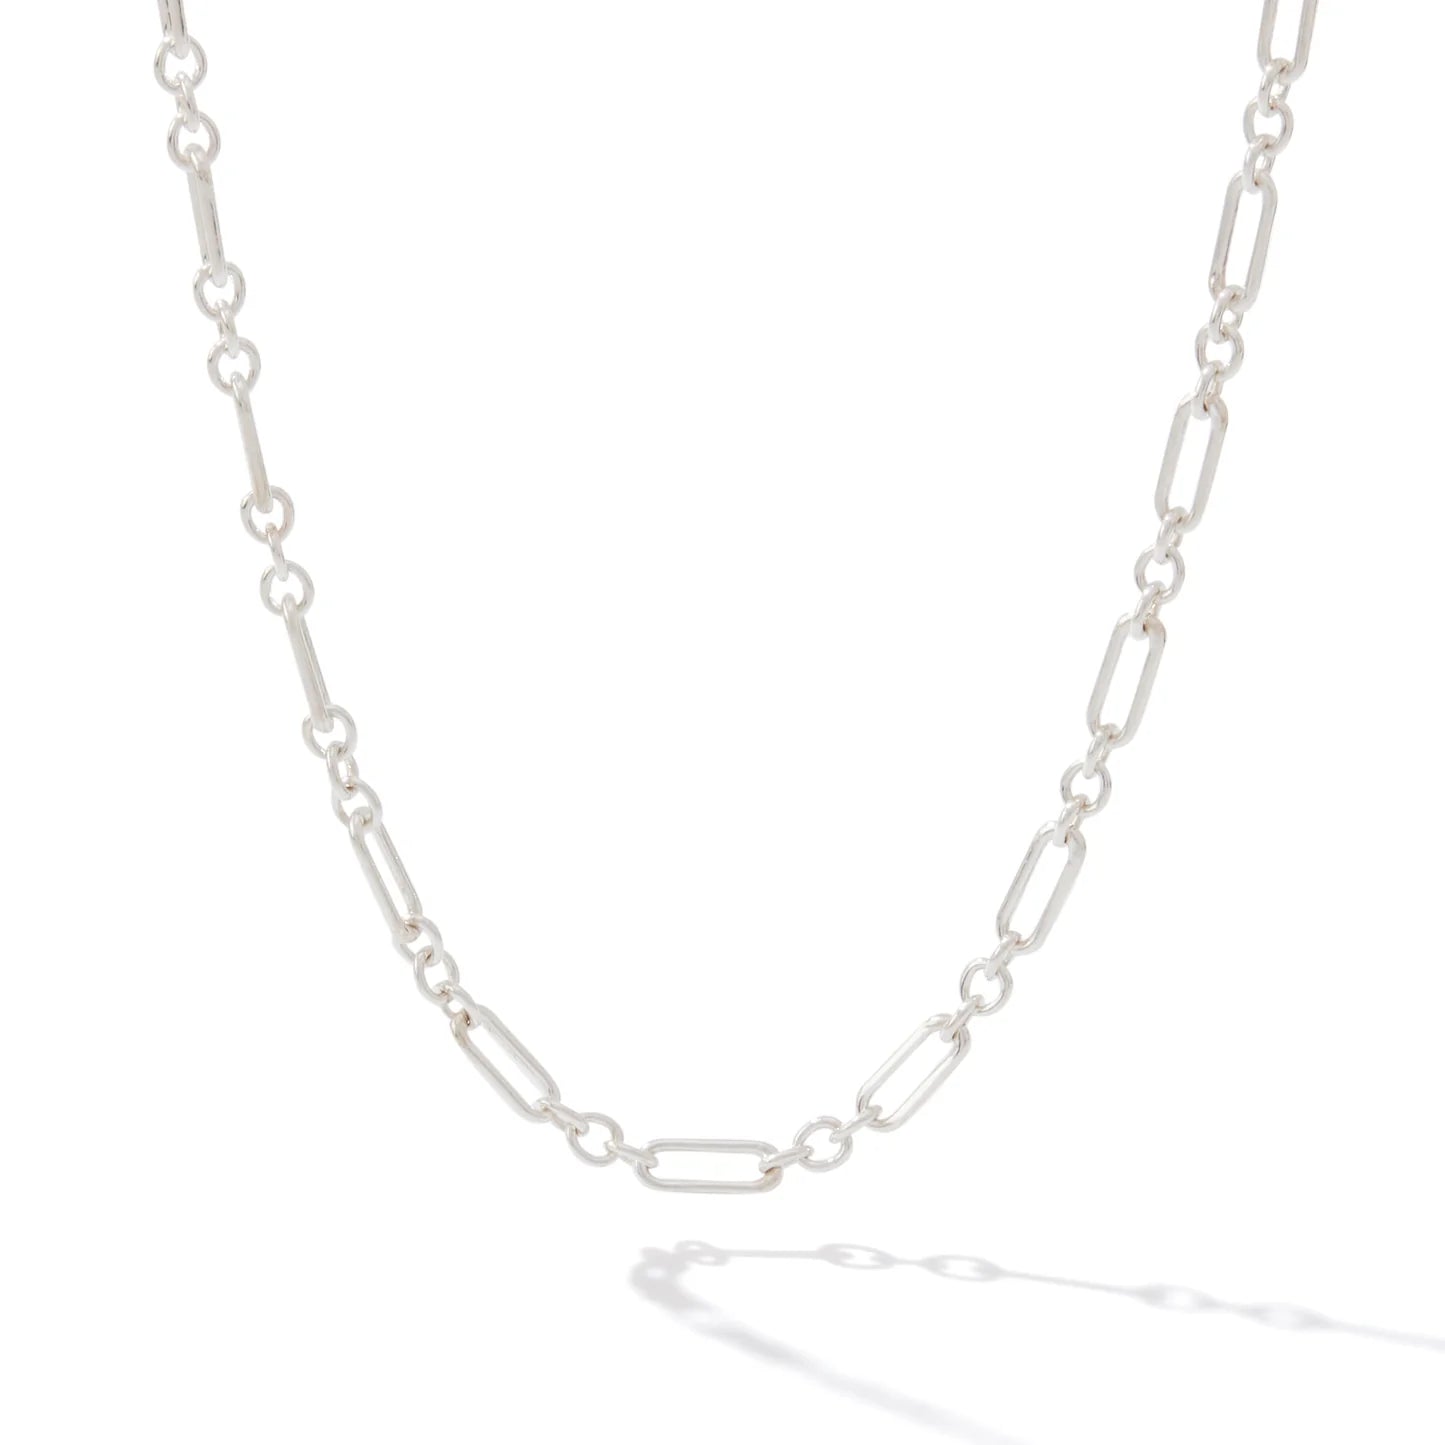 Links Of Love Necklace - 20"